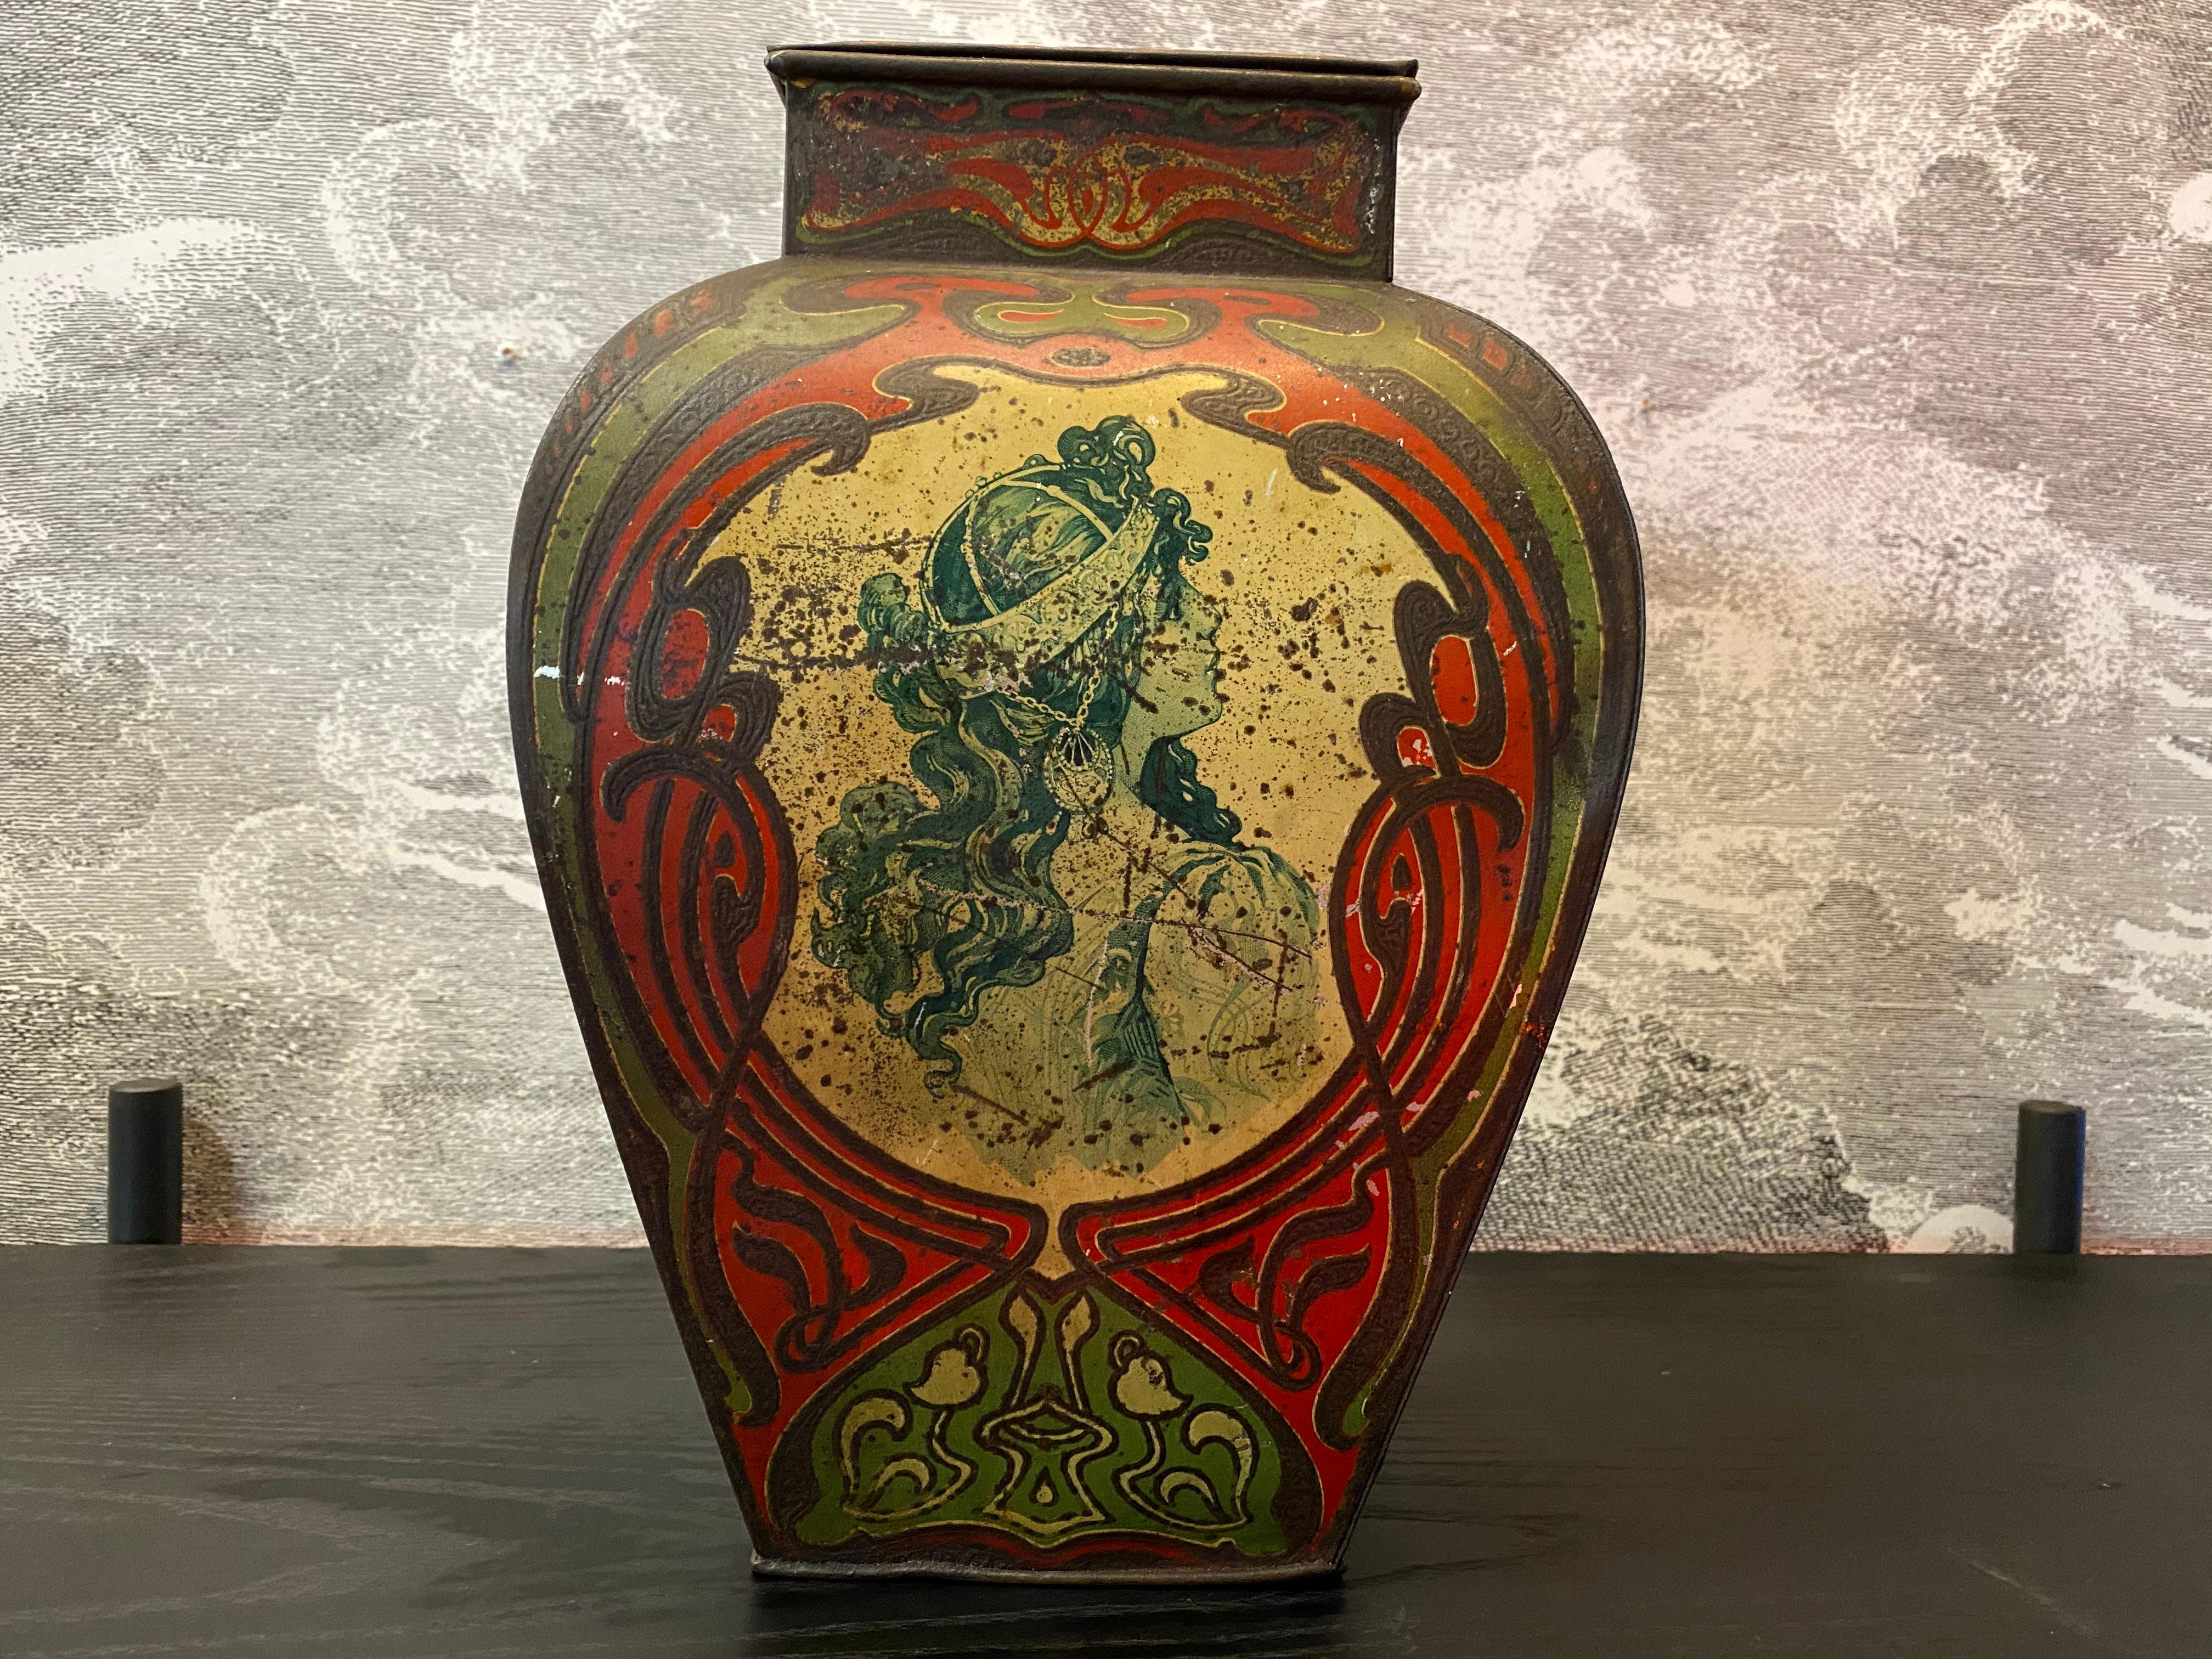 The unusual thing about this Art Nouveau tin lid box made of sheet metal is, on the one hand, its shape and, on the other, the elaborately different design of each side of the box. The typical floral ornamentation of Art Nouveau paired with 4